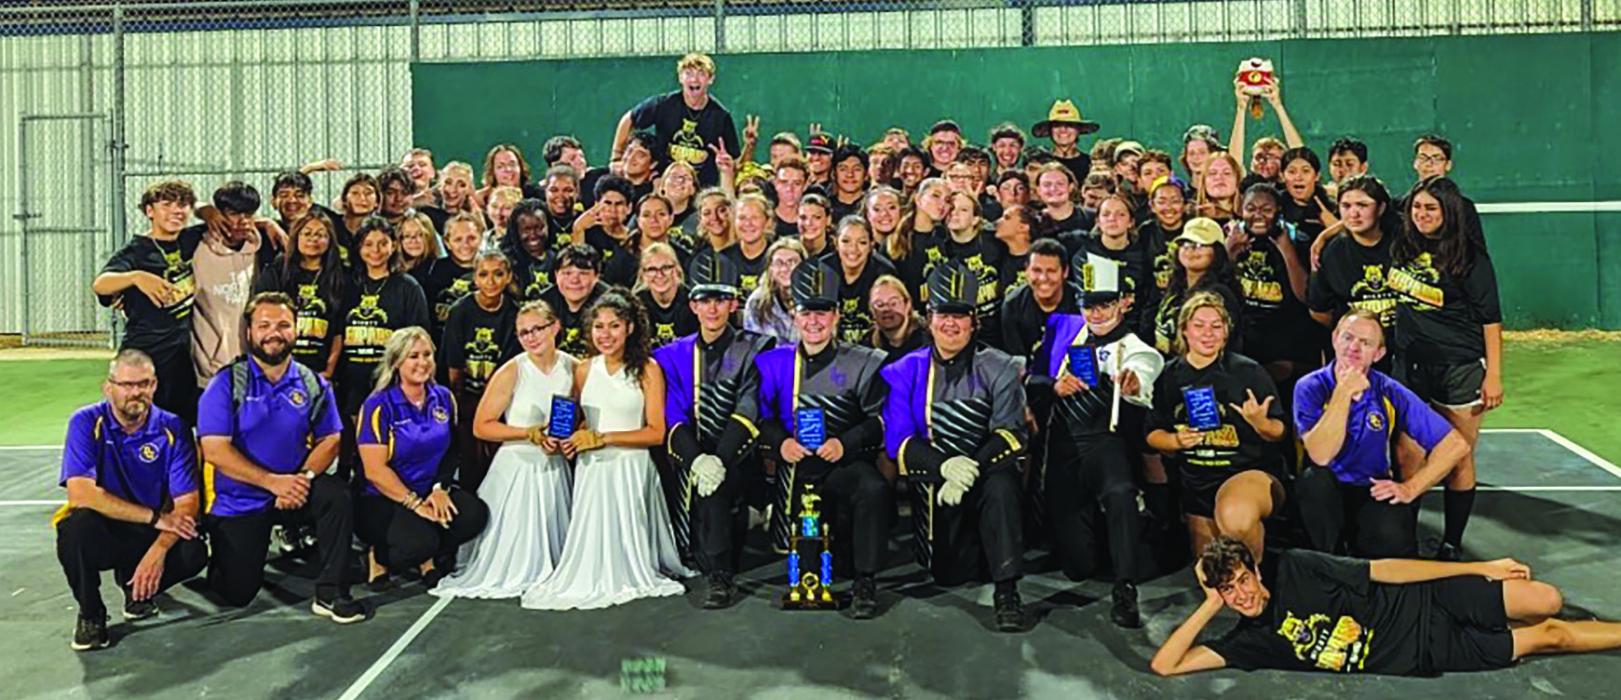 The La Grange High School band poses with their hardware after the Edna marching contest.